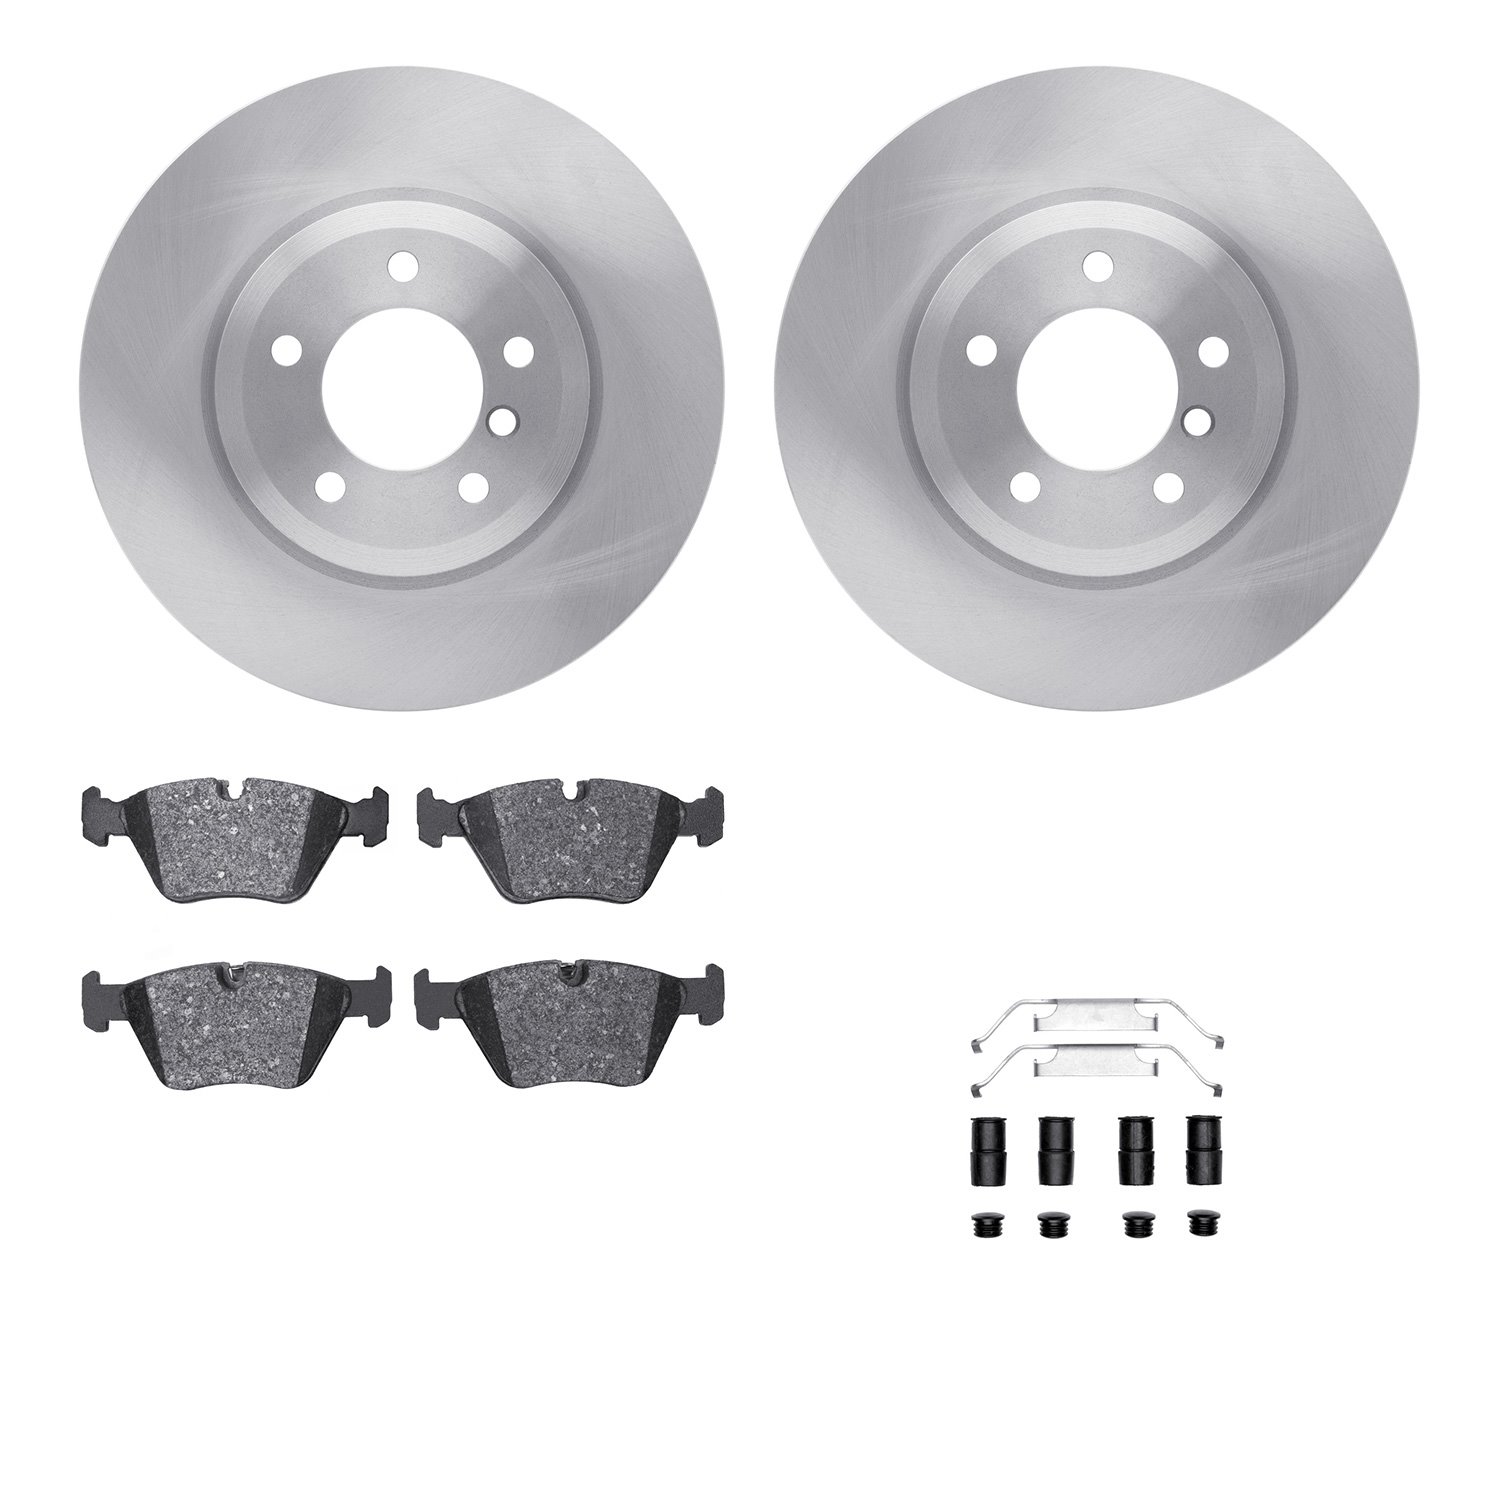 6512-31319 Brake Rotors w/5000 Advanced Brake Pads Kit with Hardware, 2001-2008 BMW, Position: Front